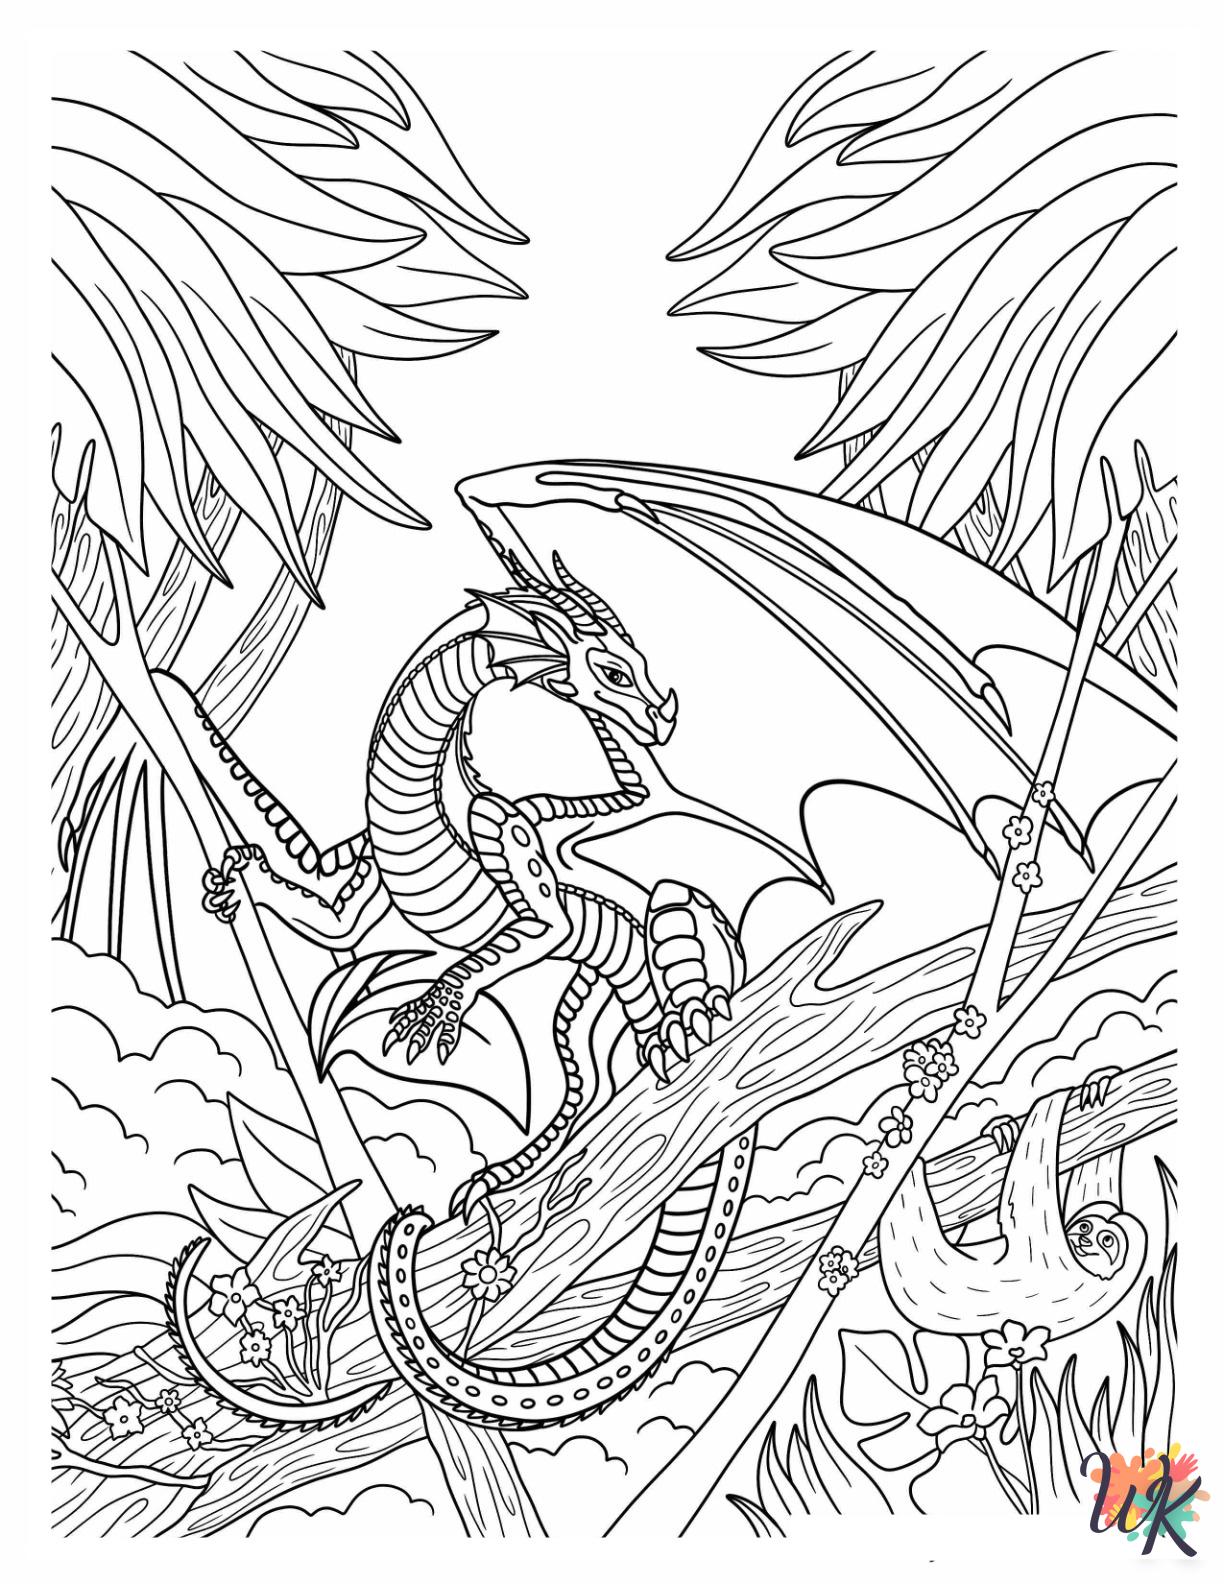 Wings Of Fire coloring pages for kids